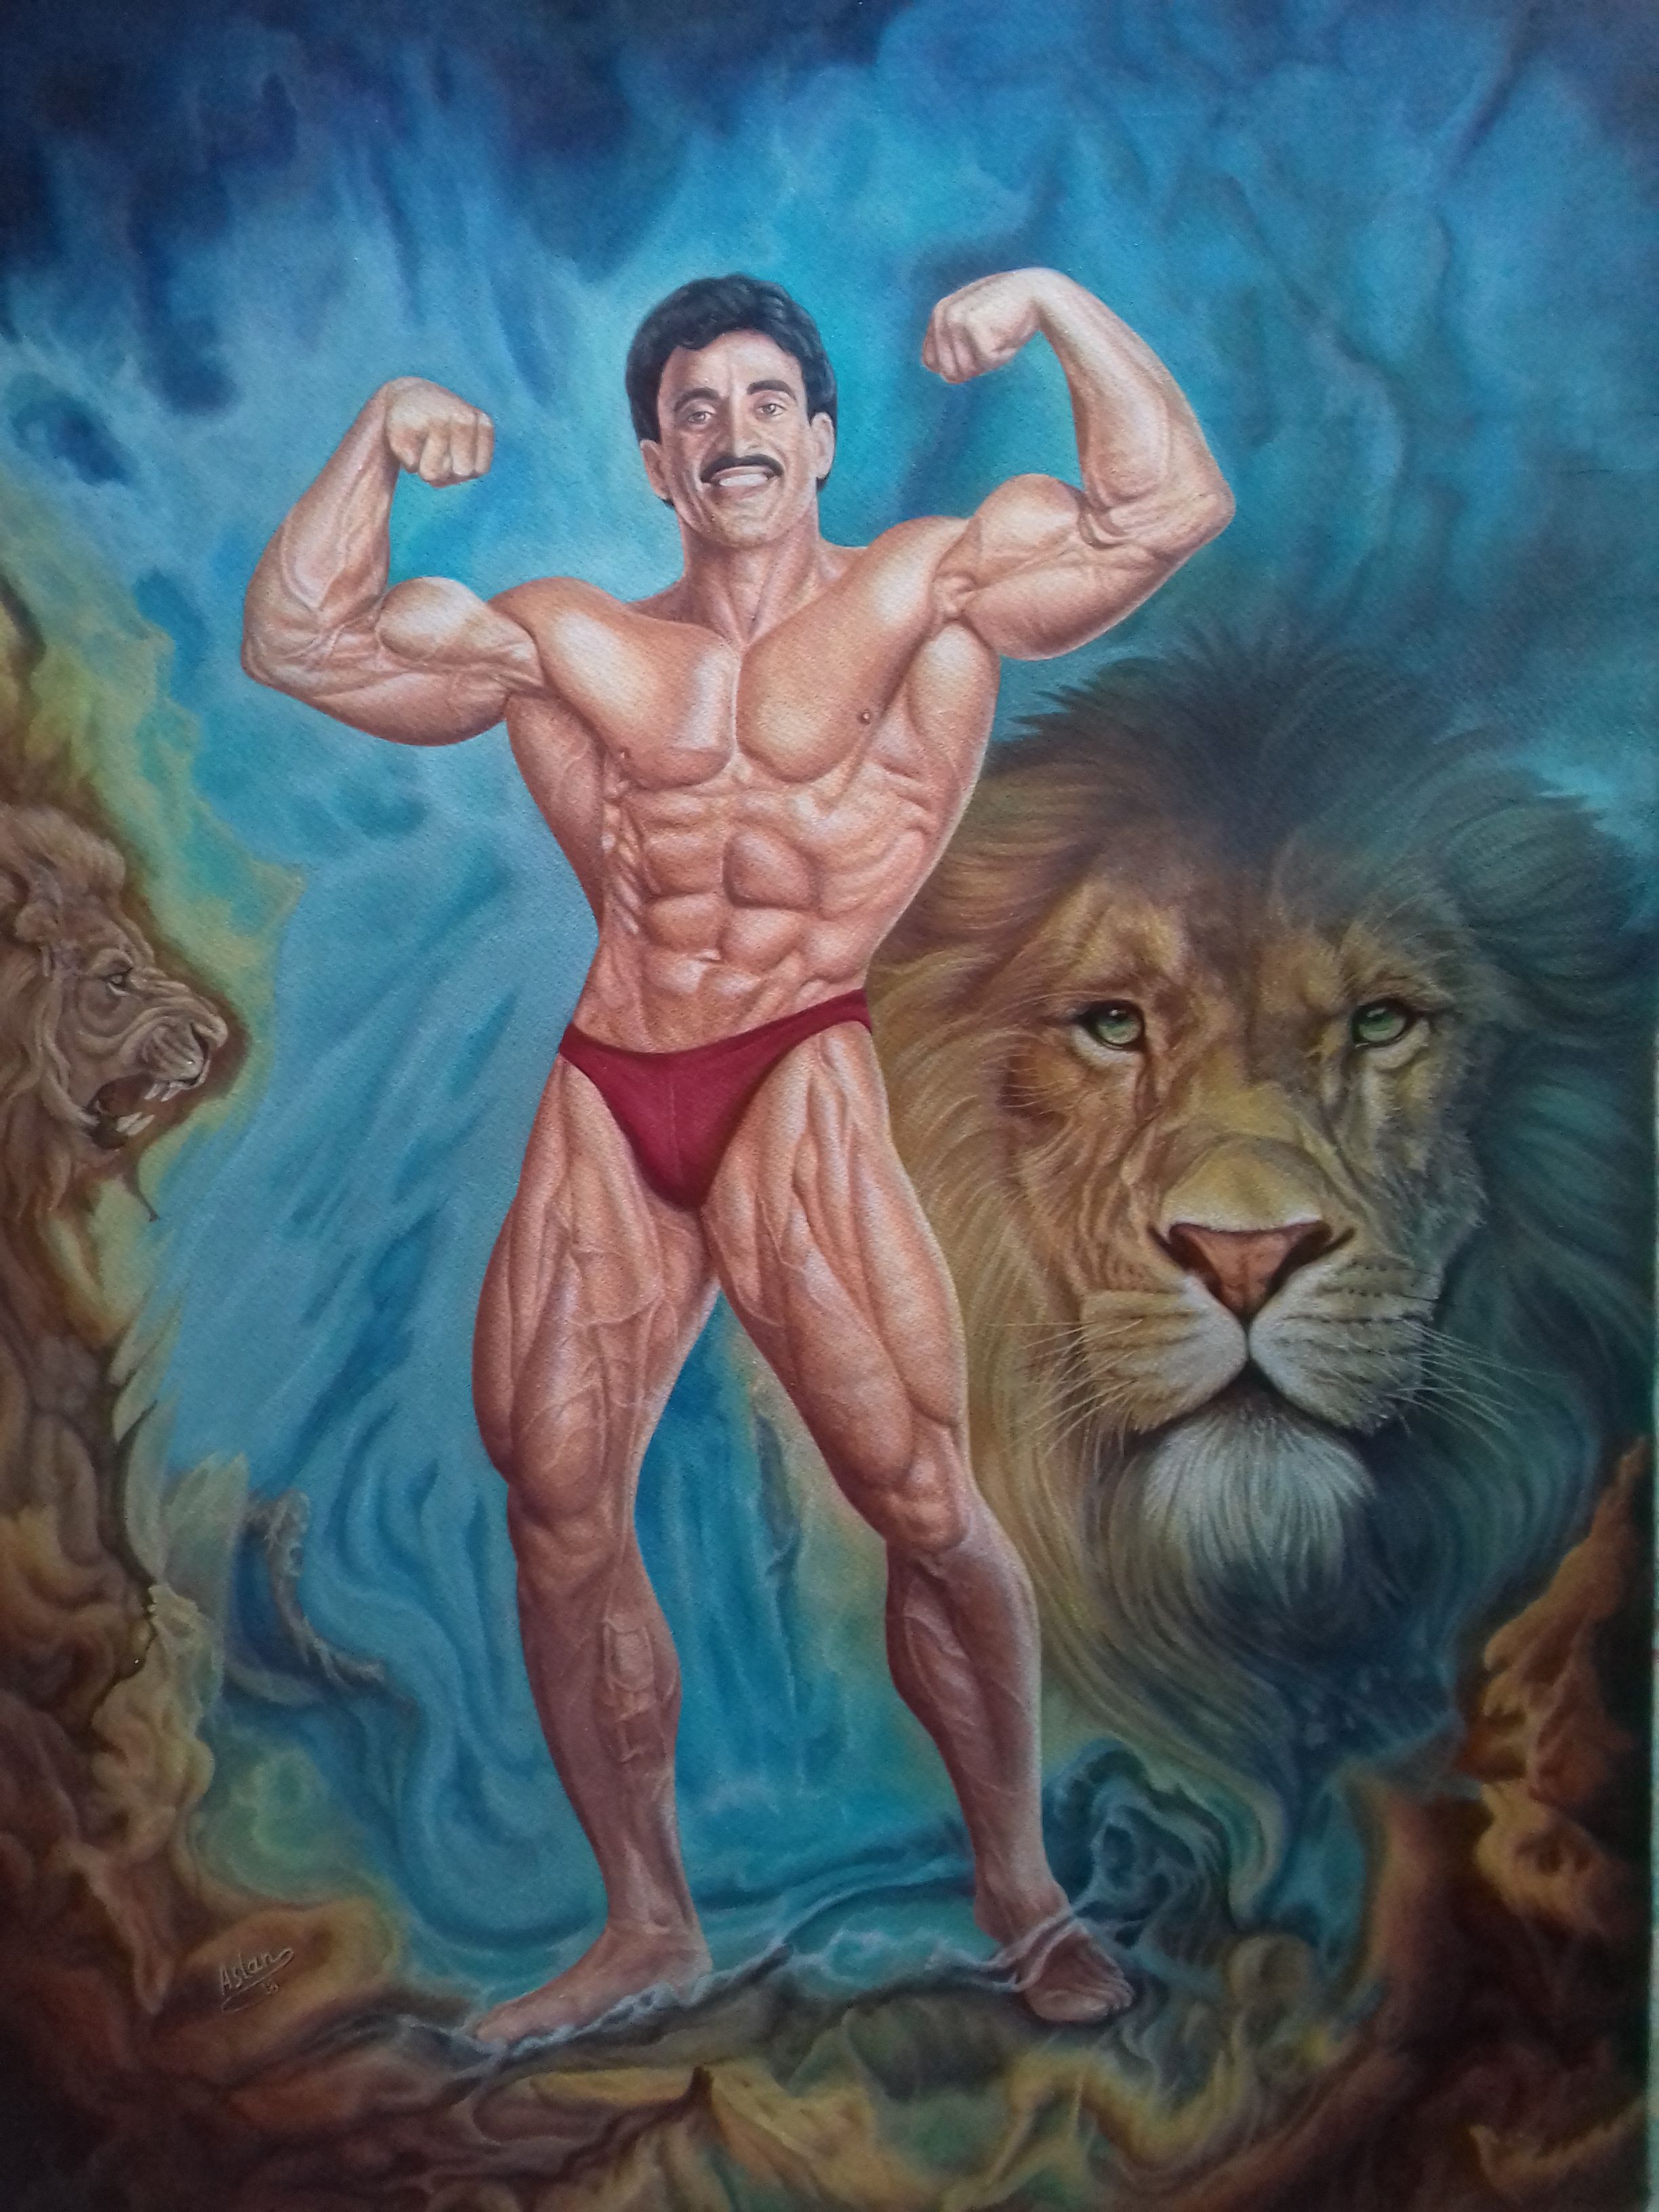 samir bannout .acralic on paper 70x50. Art, Painting, Places to